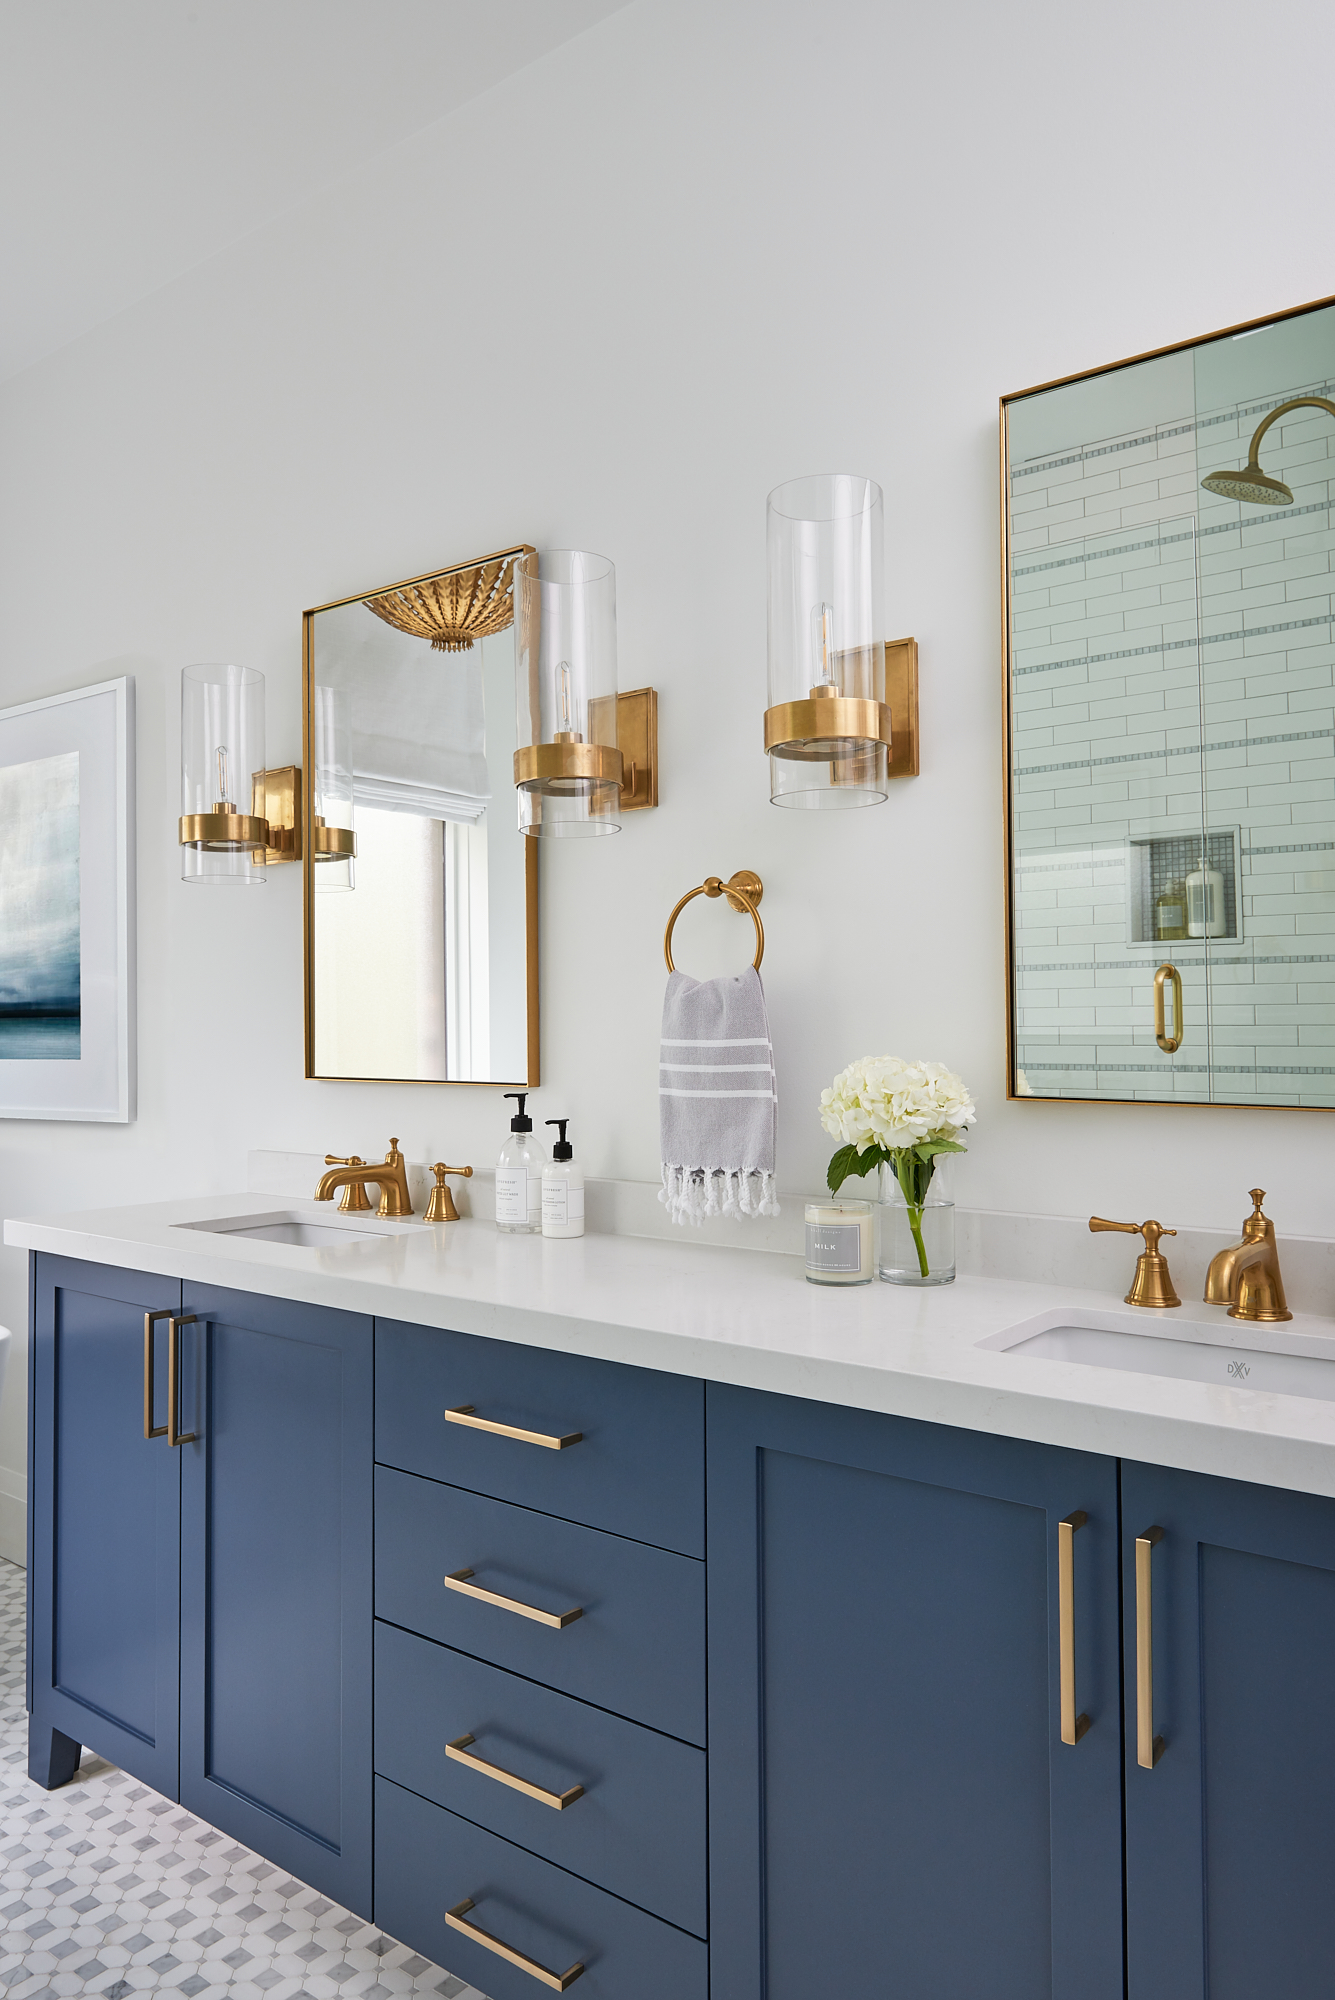 custom vanity with blue cabinets, gold fixtures, and decorative wall sconces on either side of mirrors